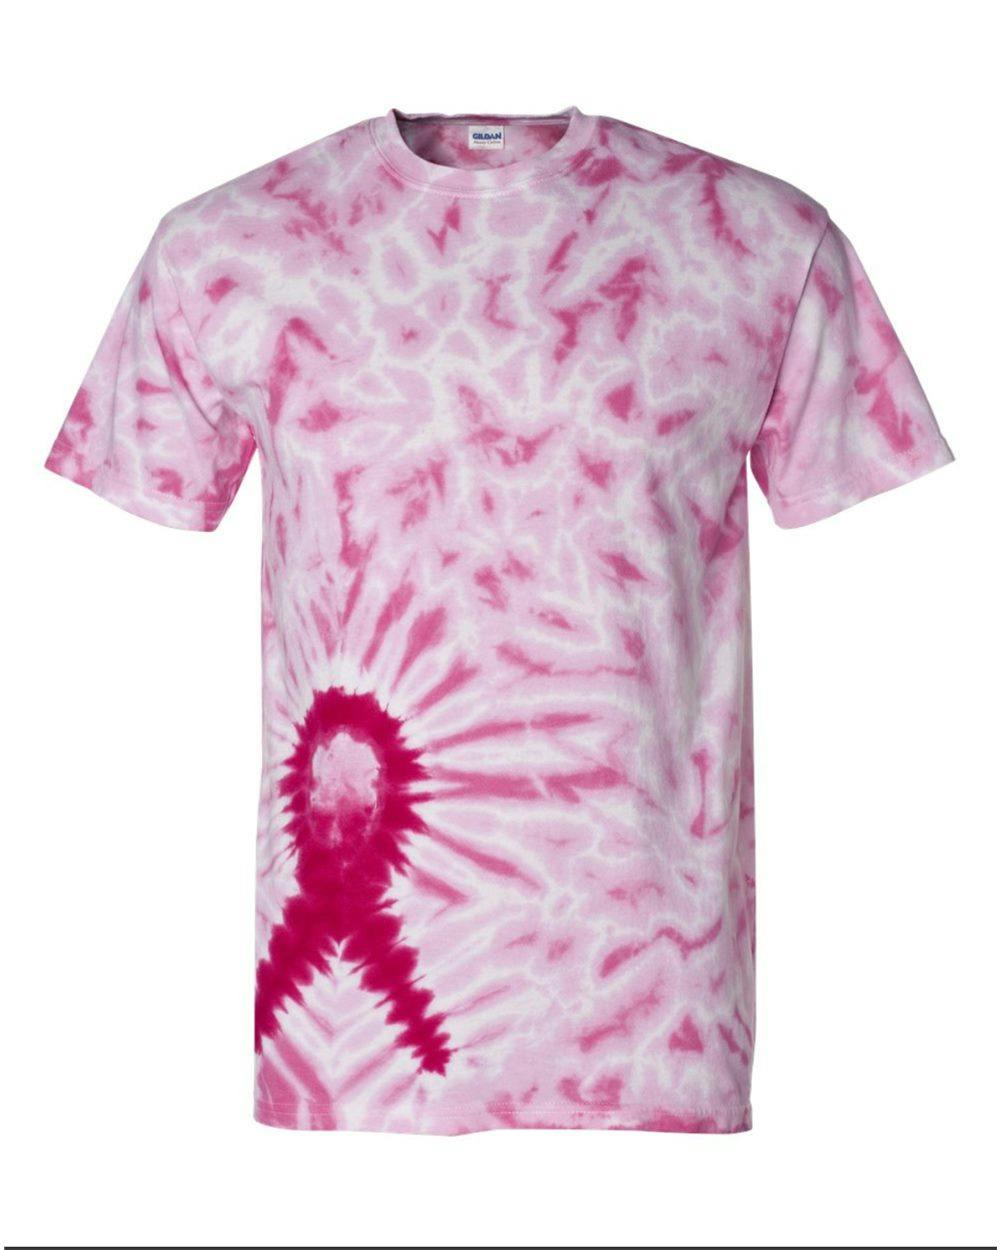 Image for Awareness Ribbon Tie-Dyed T-Shirt - 200AR